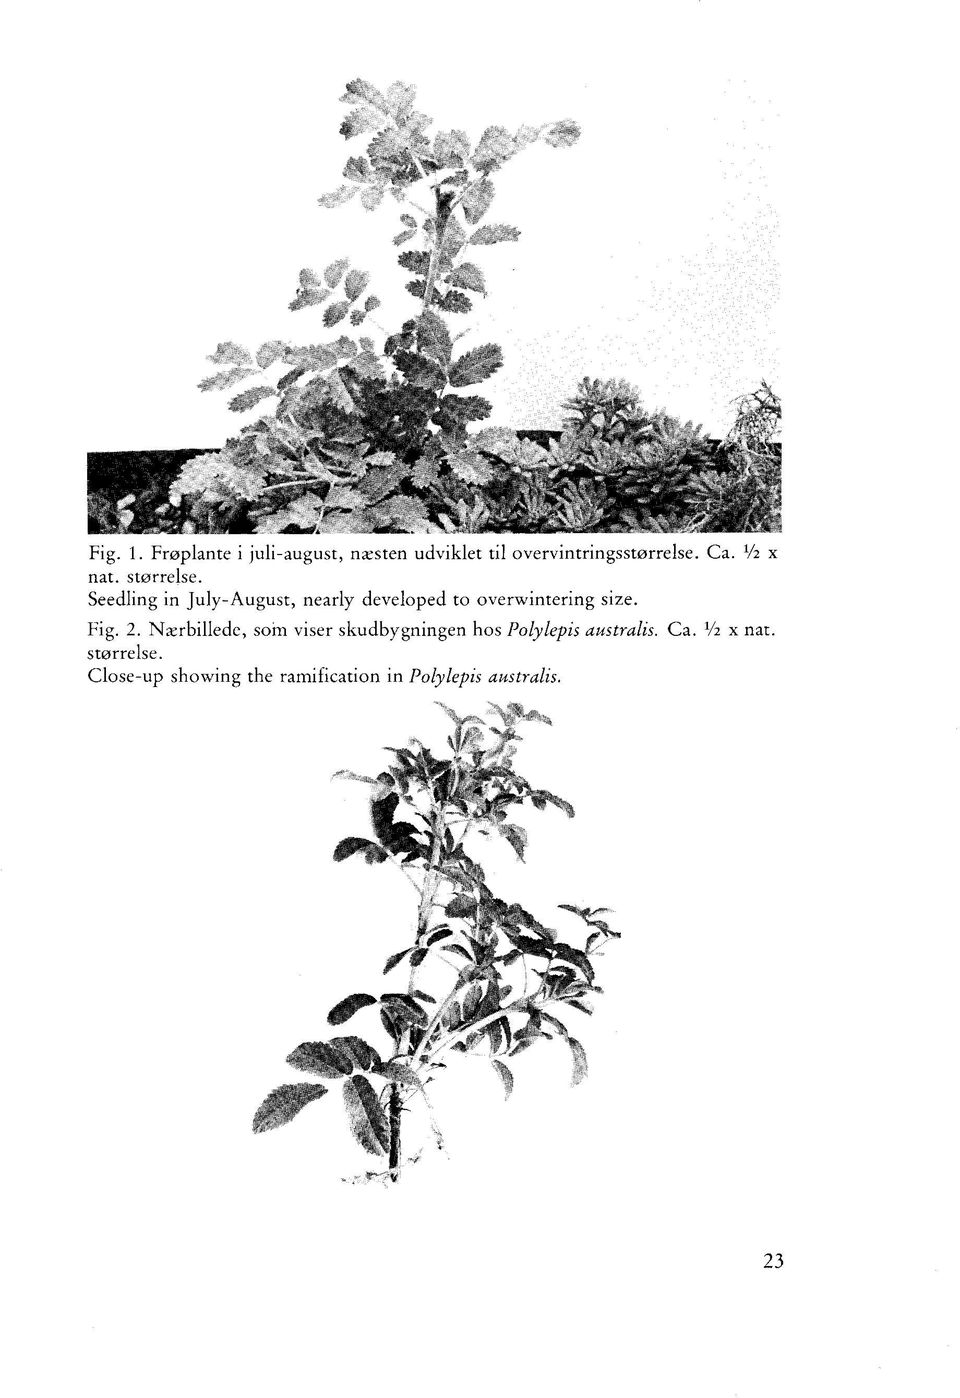 Seedling in July-August, nearly developed to overwintering size. Fig. 2.